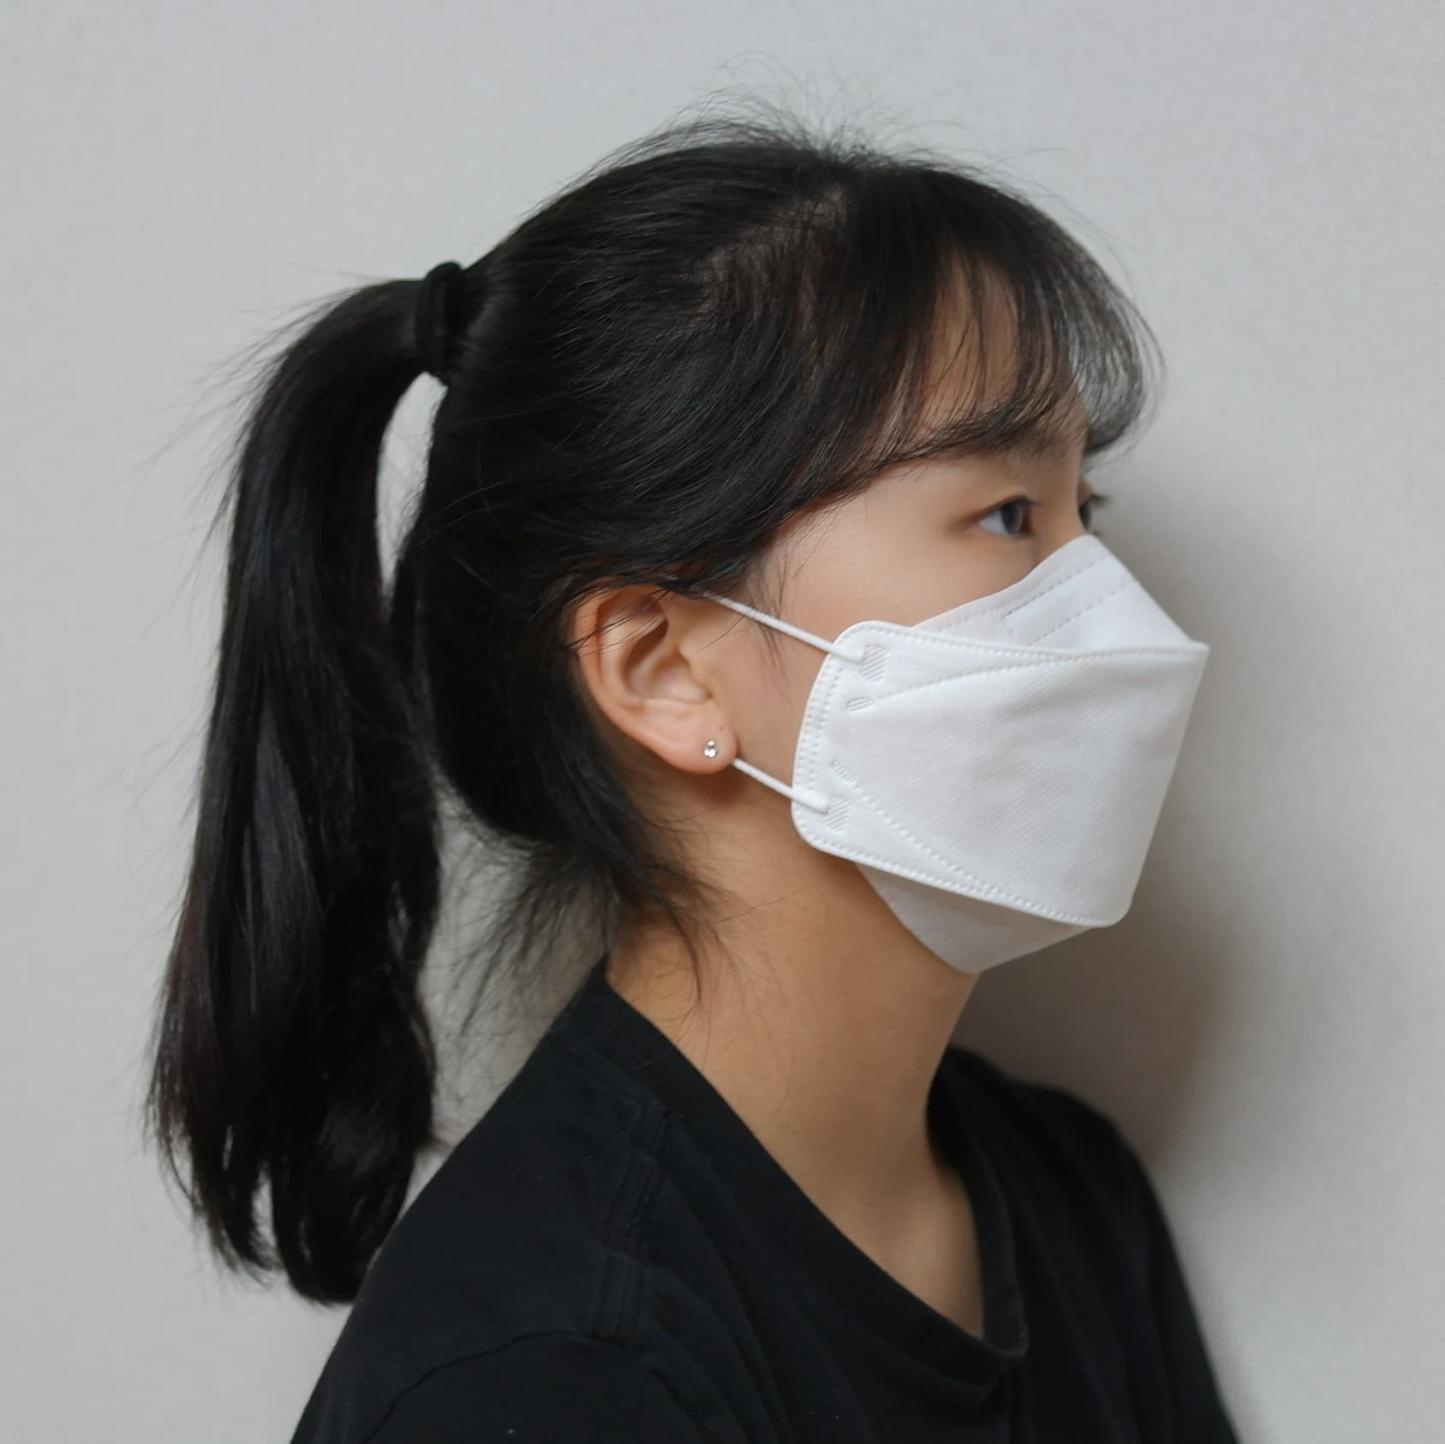 KF94 Masks: Addressing Common Concerns And Misconceptions